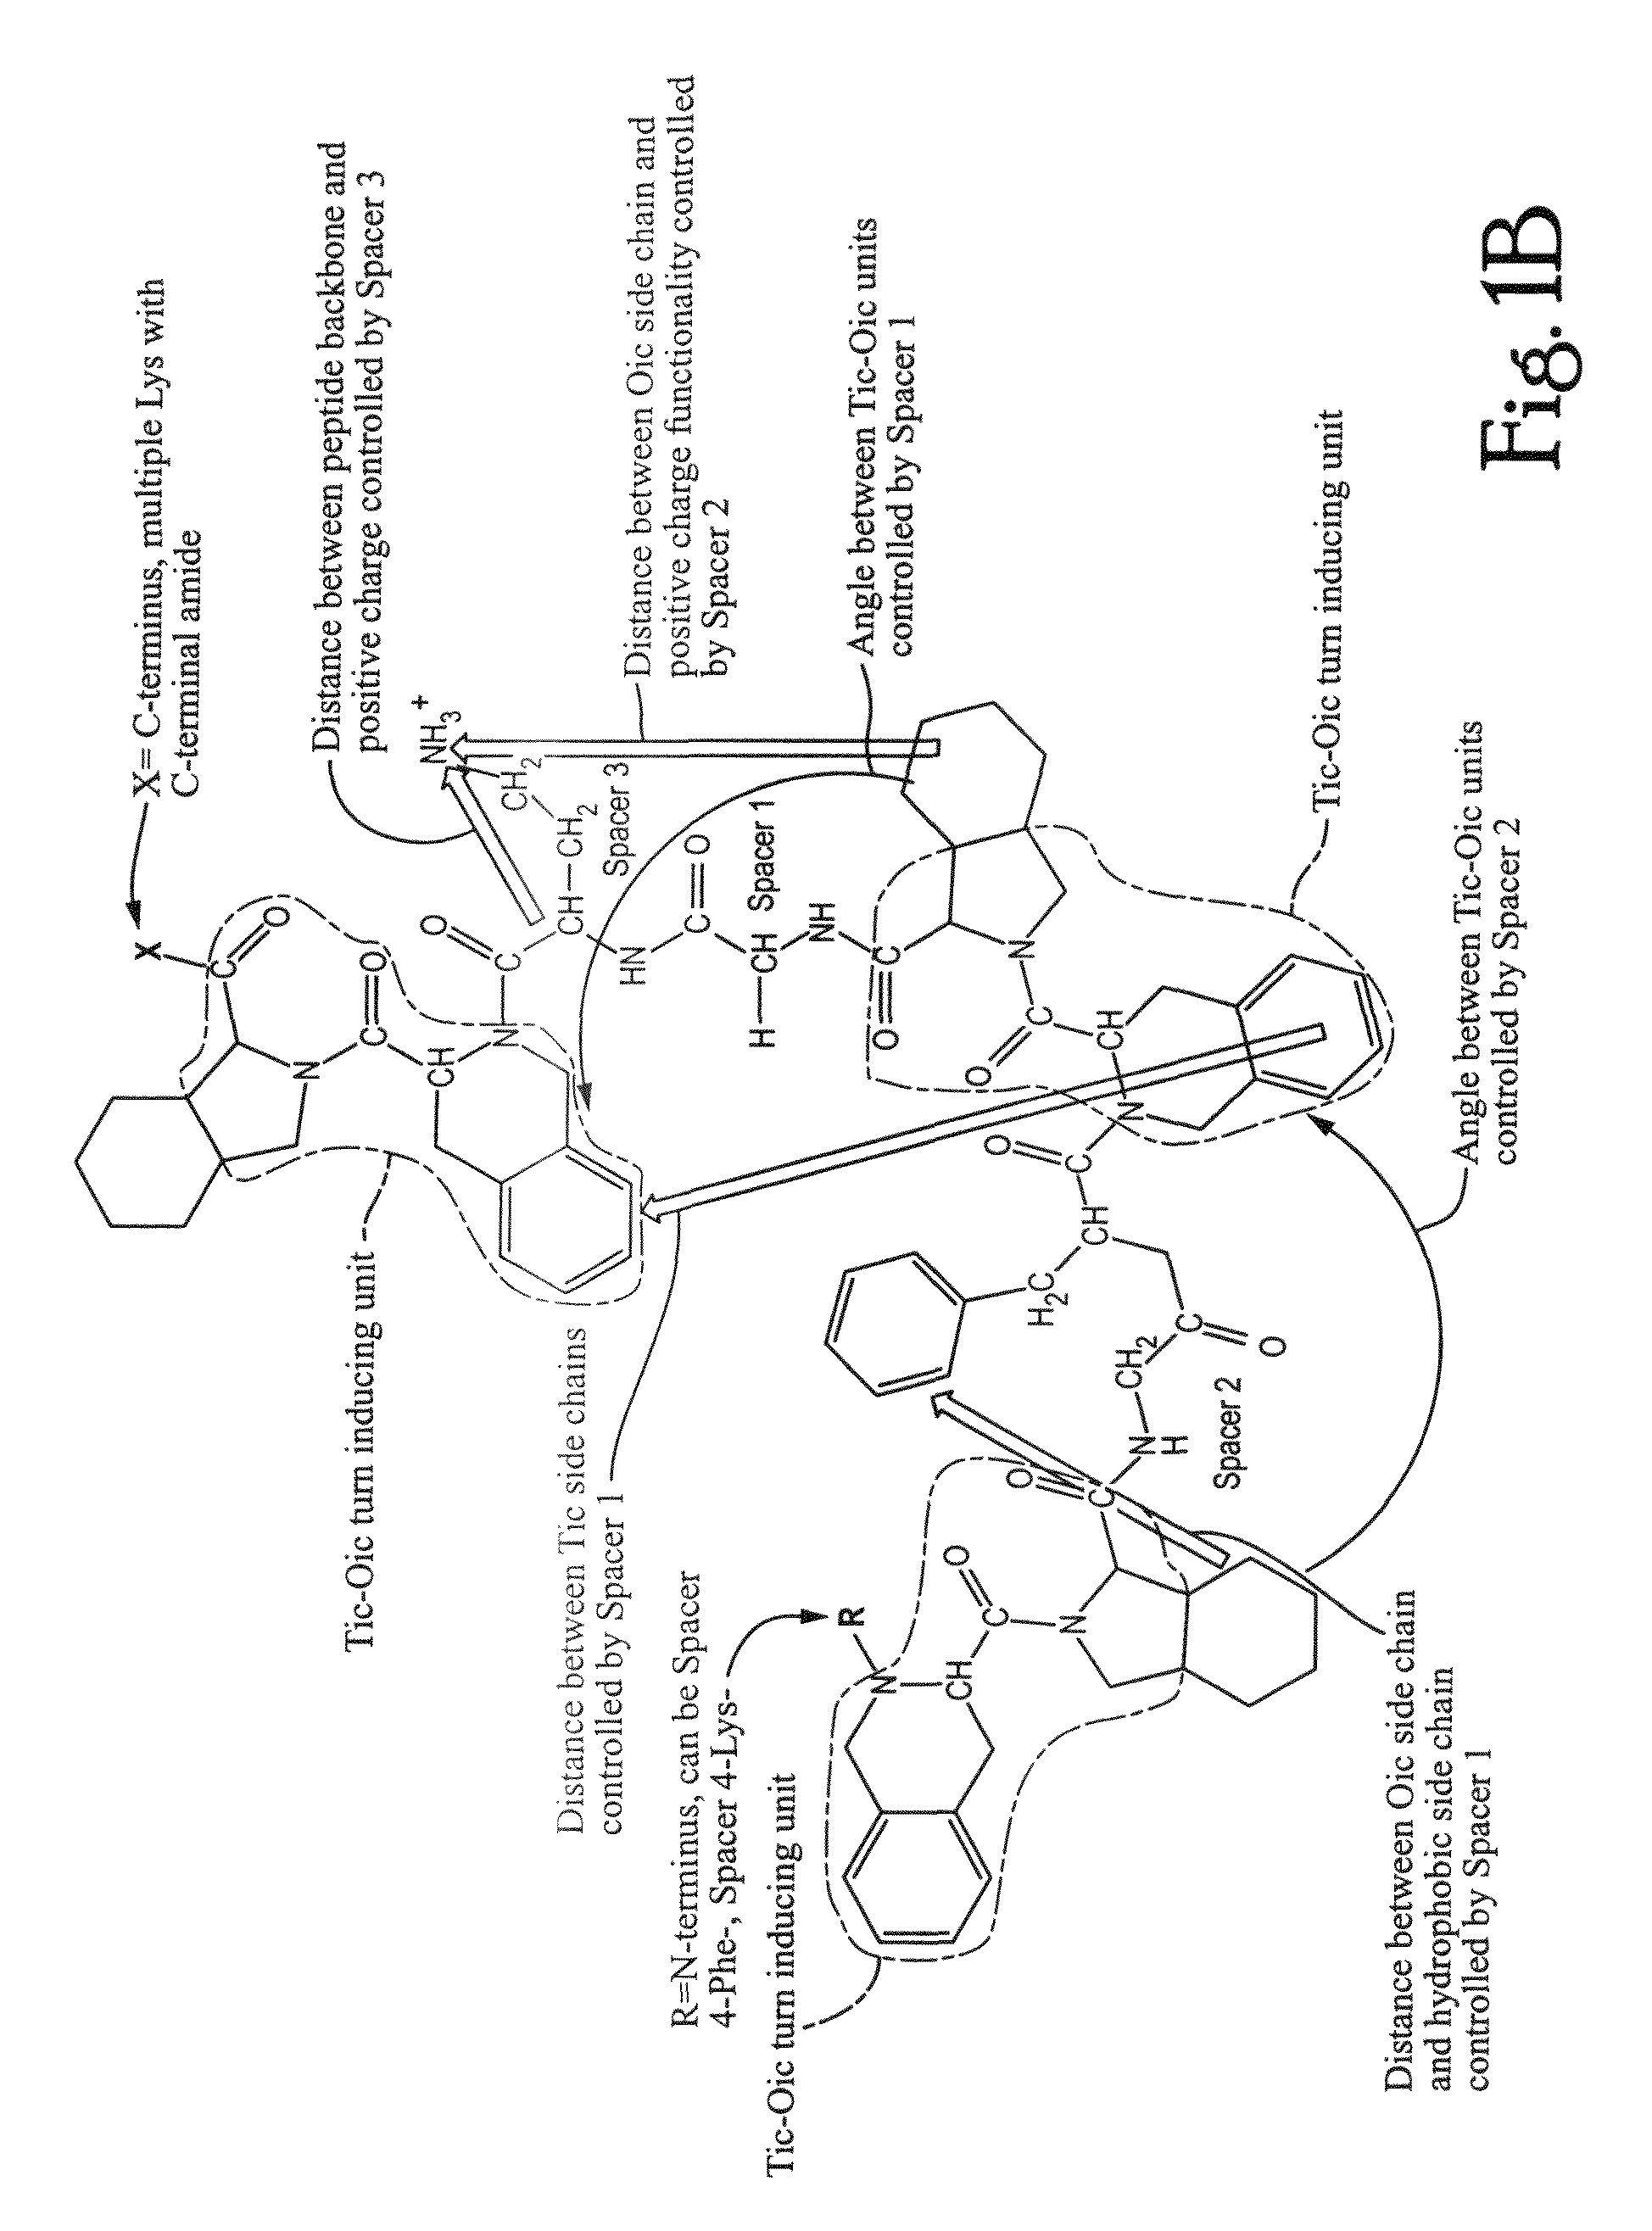 Anti-microbial peptidomimetic compounds and methods to calculate anti-microbial activity